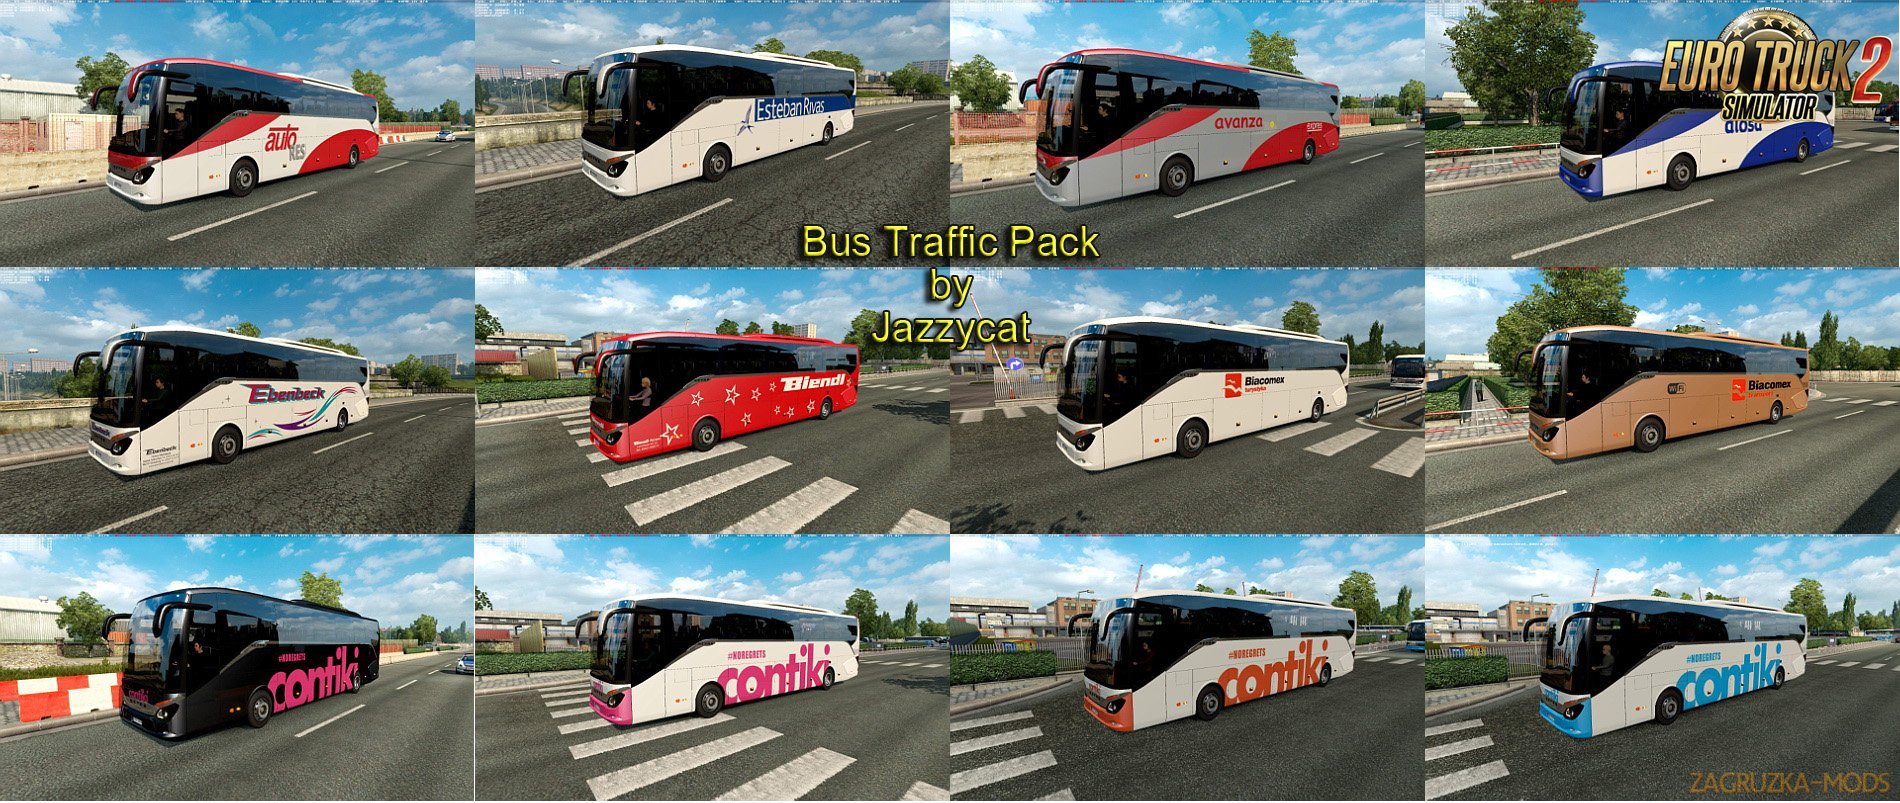 Bus Traffic Pack v2.7 by Jazzycat